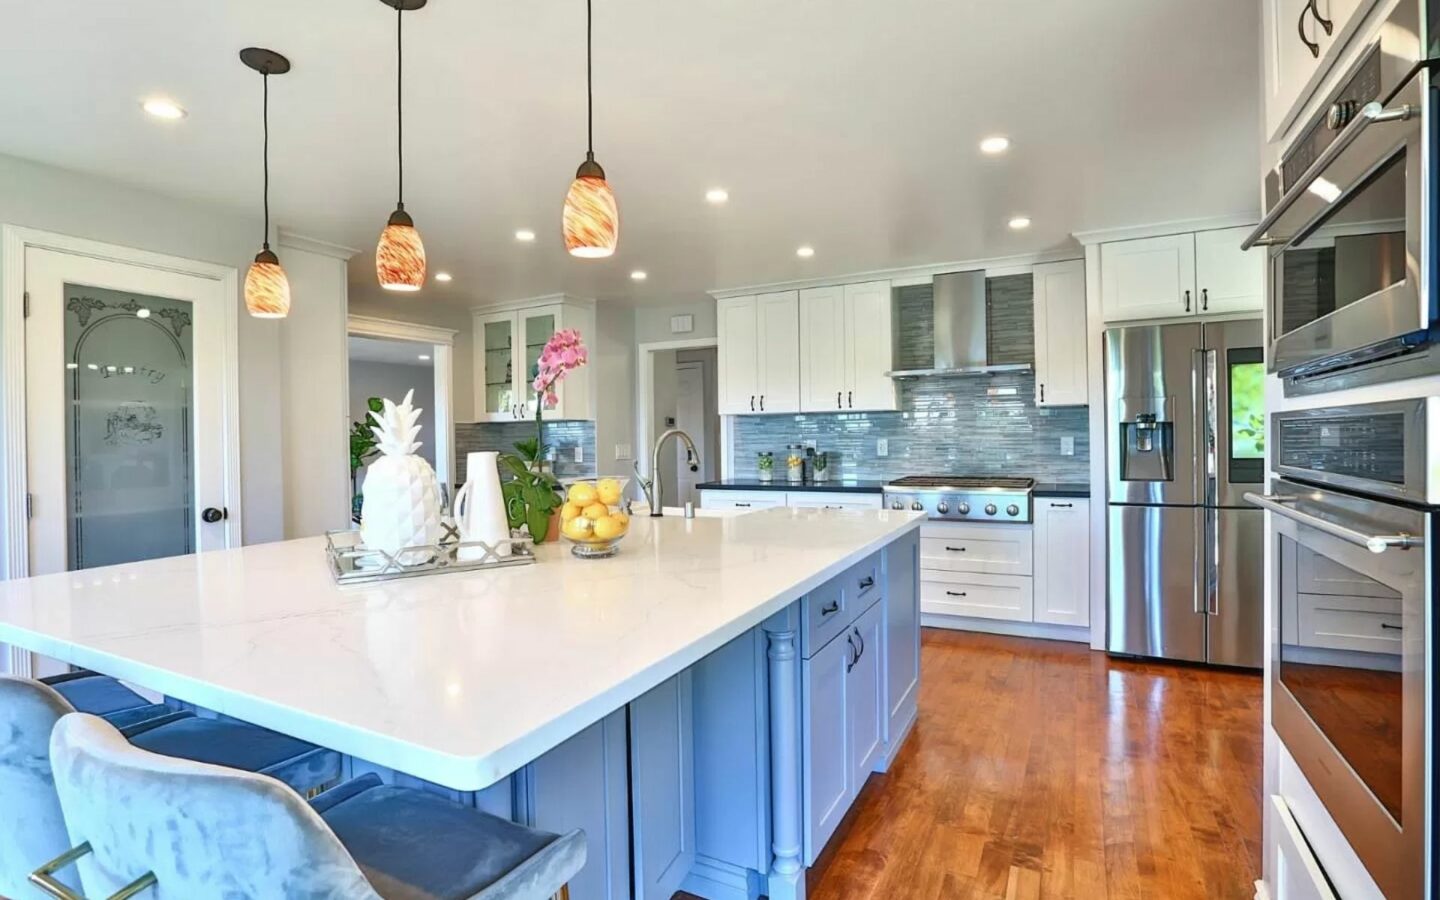 Kitchen Remodeling - A newly-remodeled kitchen with a stainless steel sink and double-door refrigerator, rich mahogany-colored cabinets, granite countertops, and tile floors.